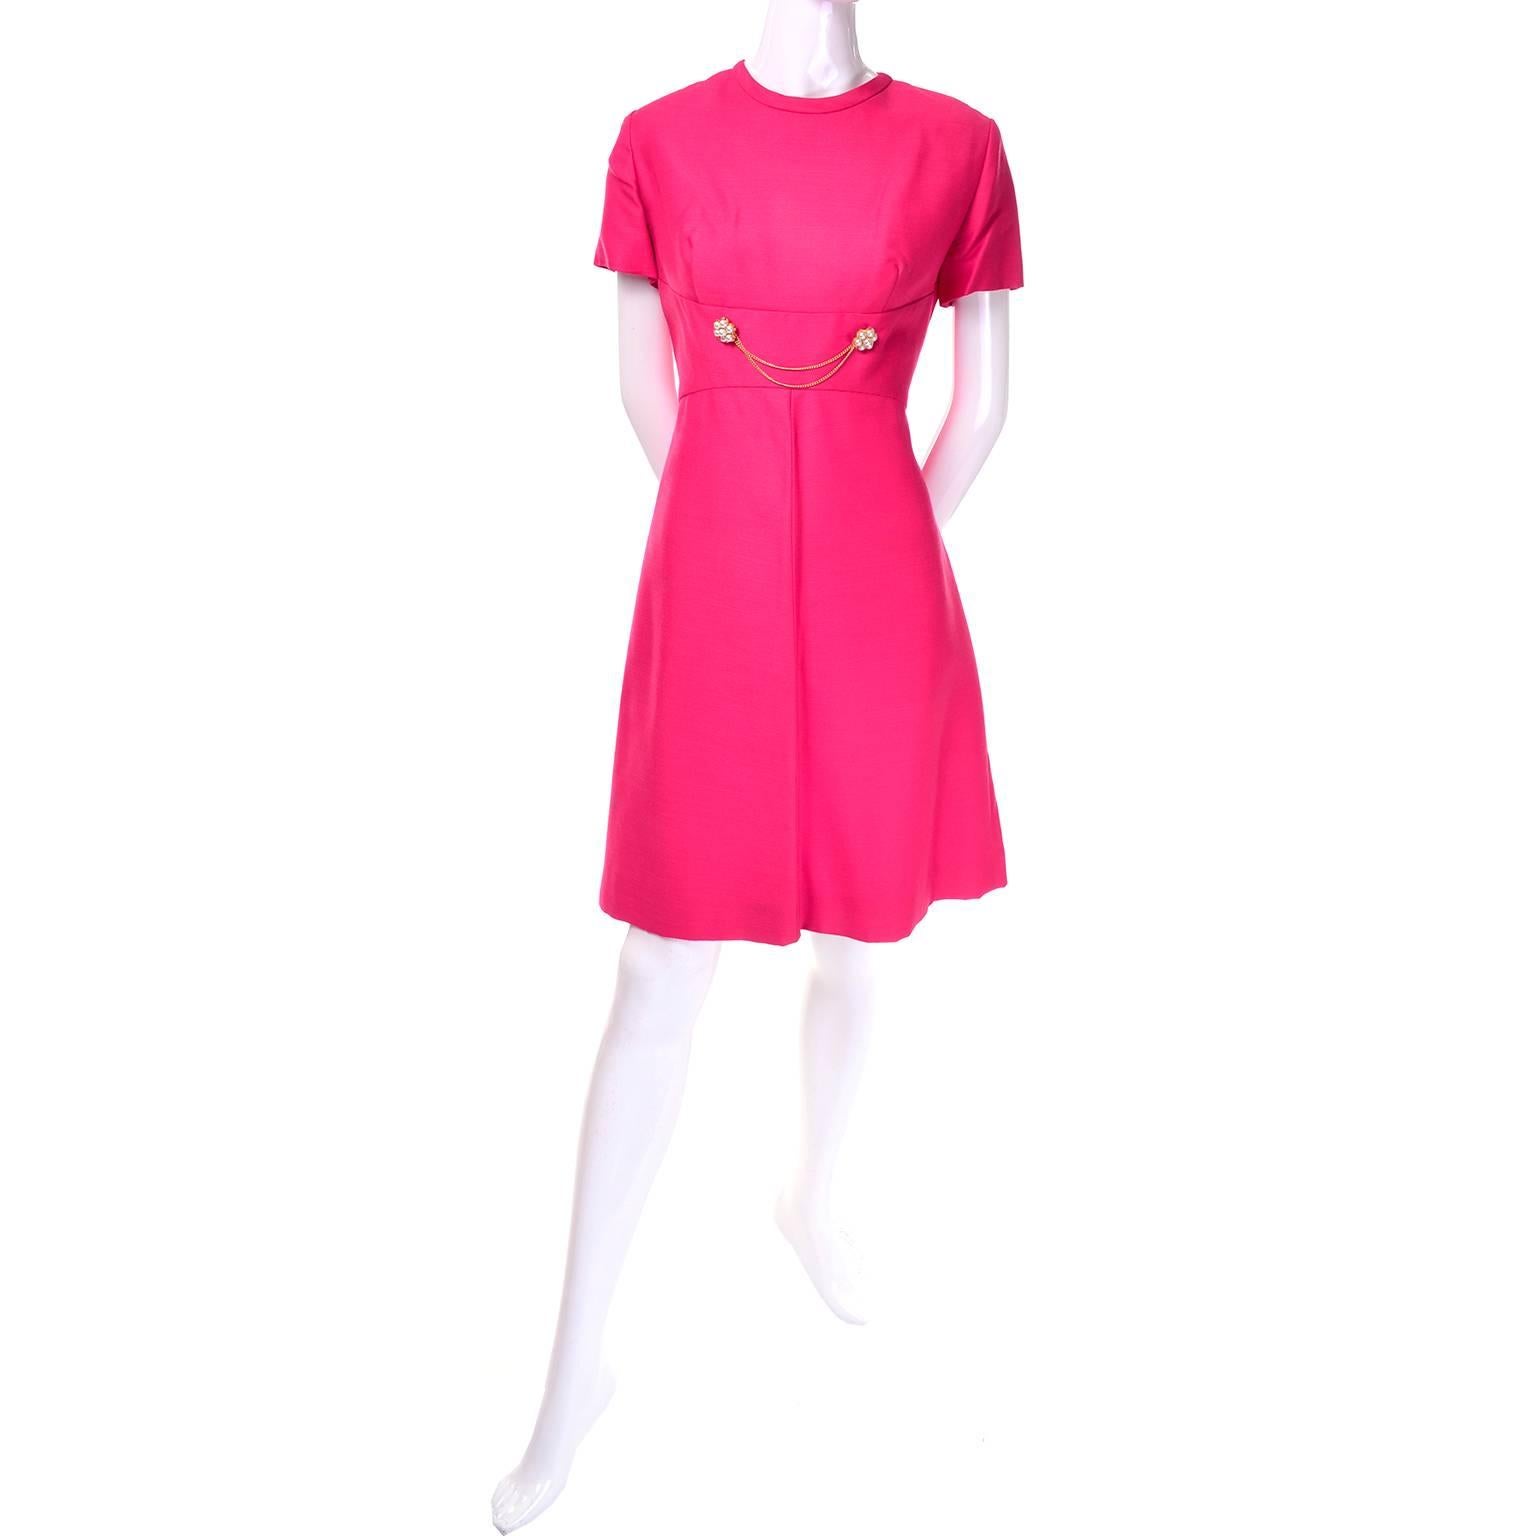 This bright pink dress and matching coat by Emma Domb is from the late 1960's but appears to have been barely if ever worn. The short sleeved dress has a fitted waist adorned with two chains and clusters of pearl beads. The coat has decorative